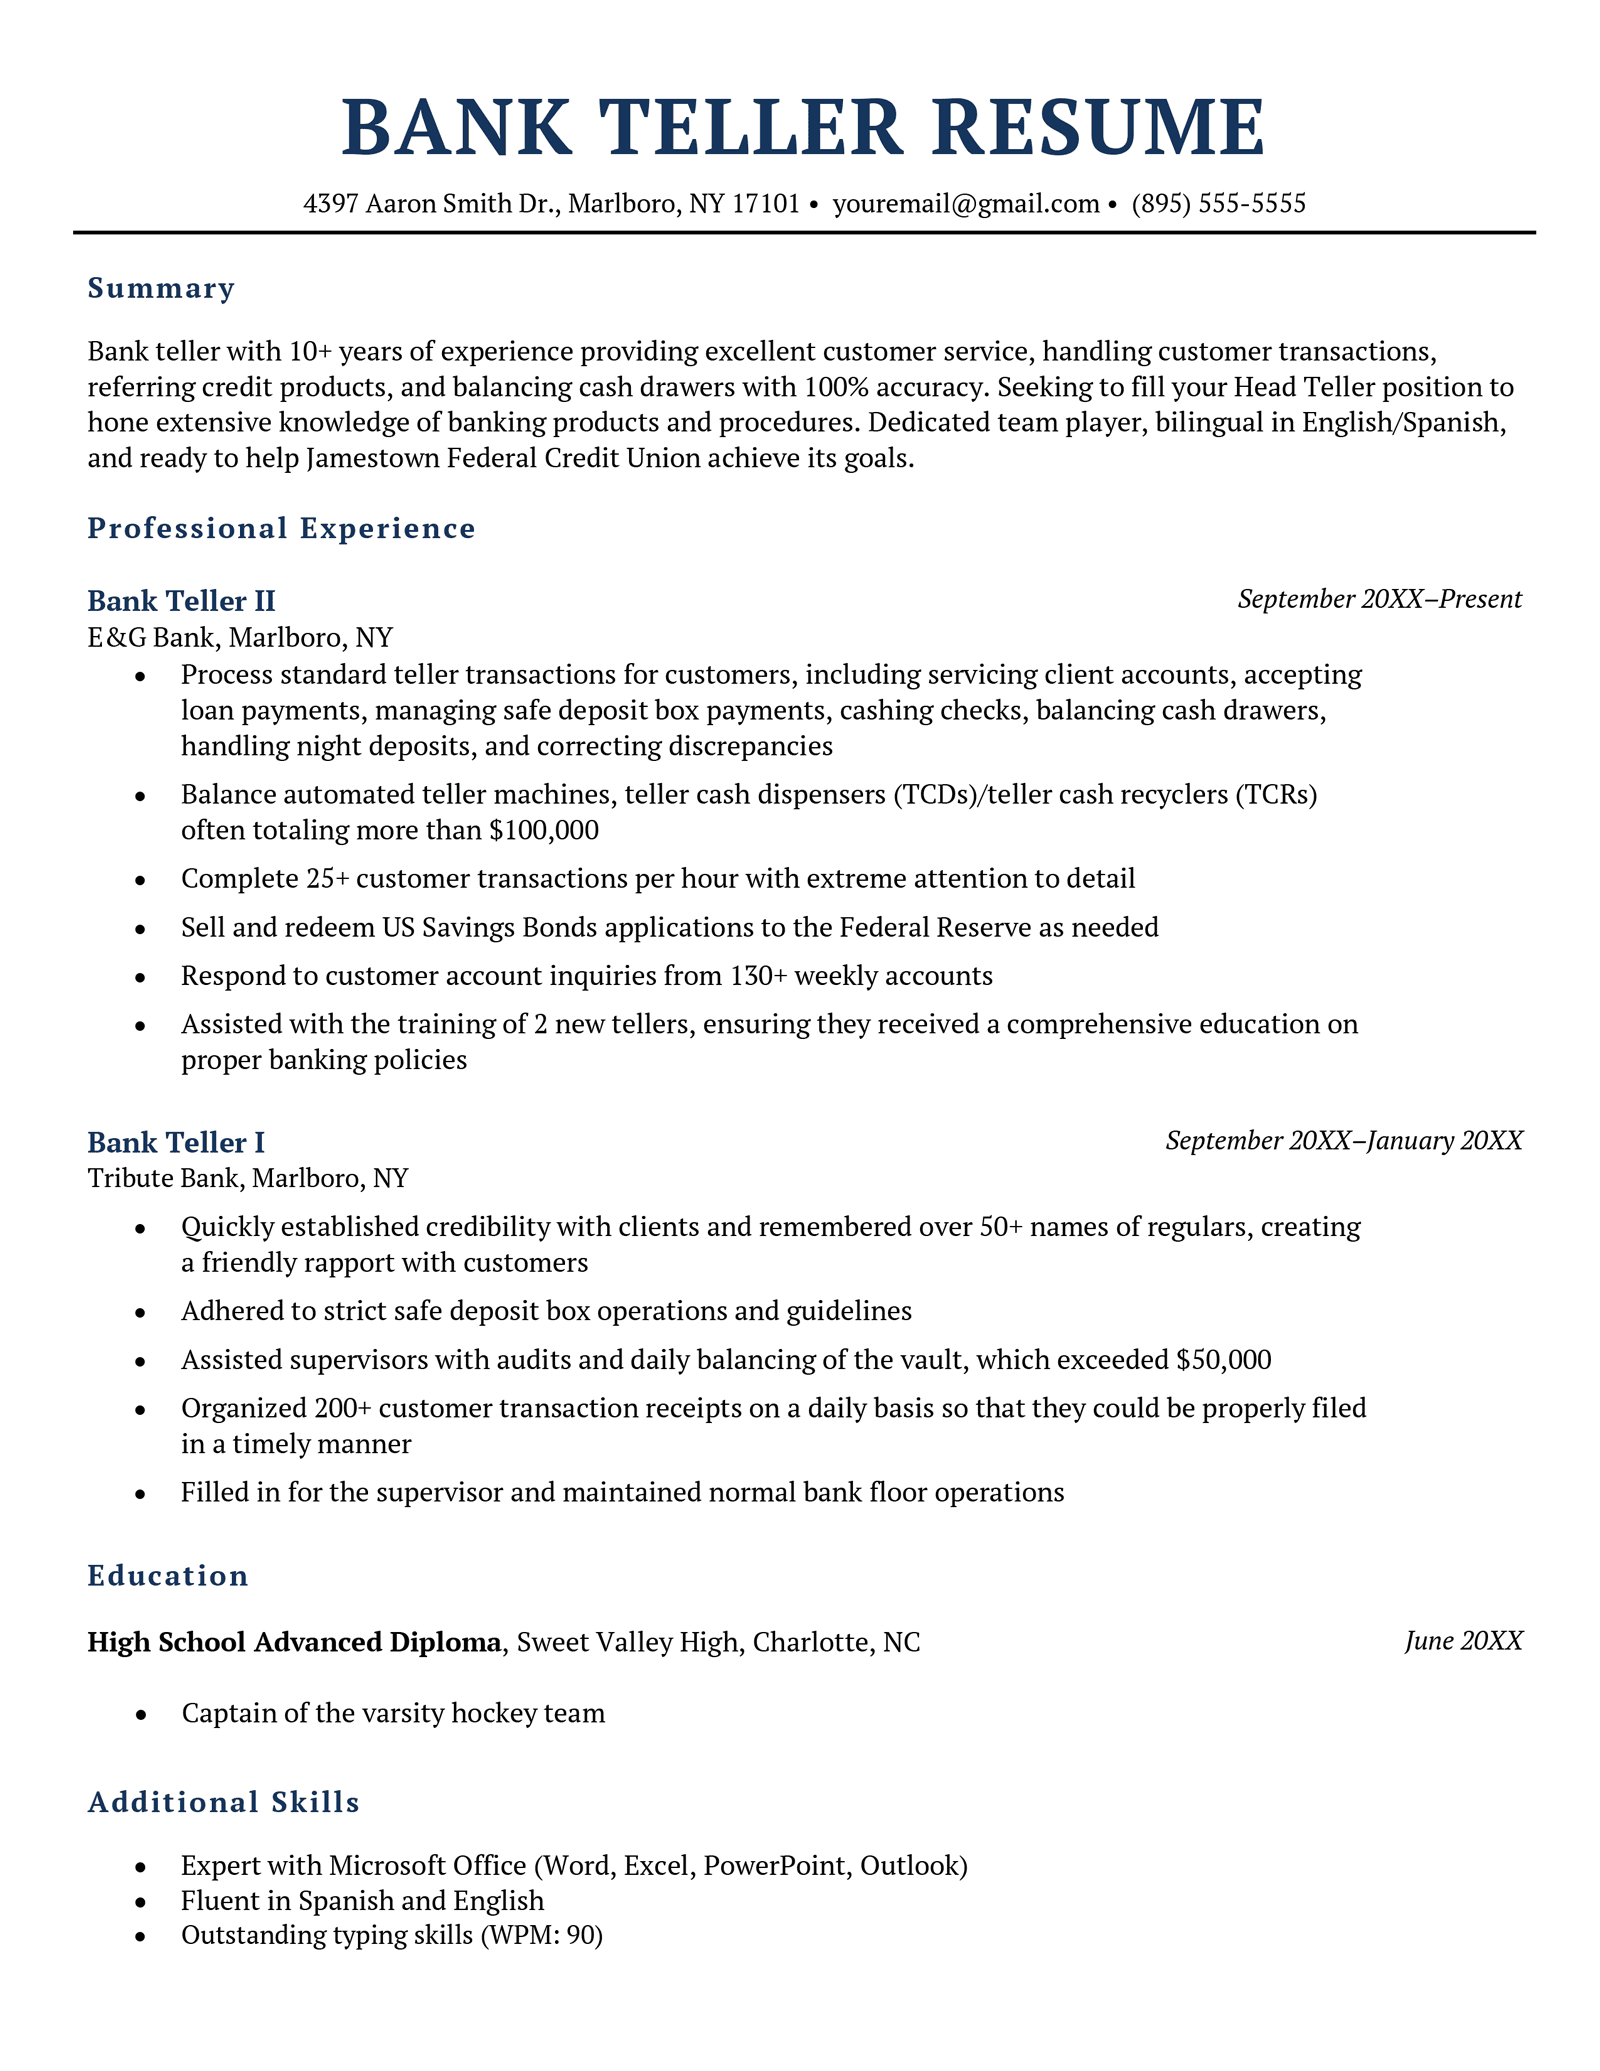 A bank teller resume example with dark blue header text